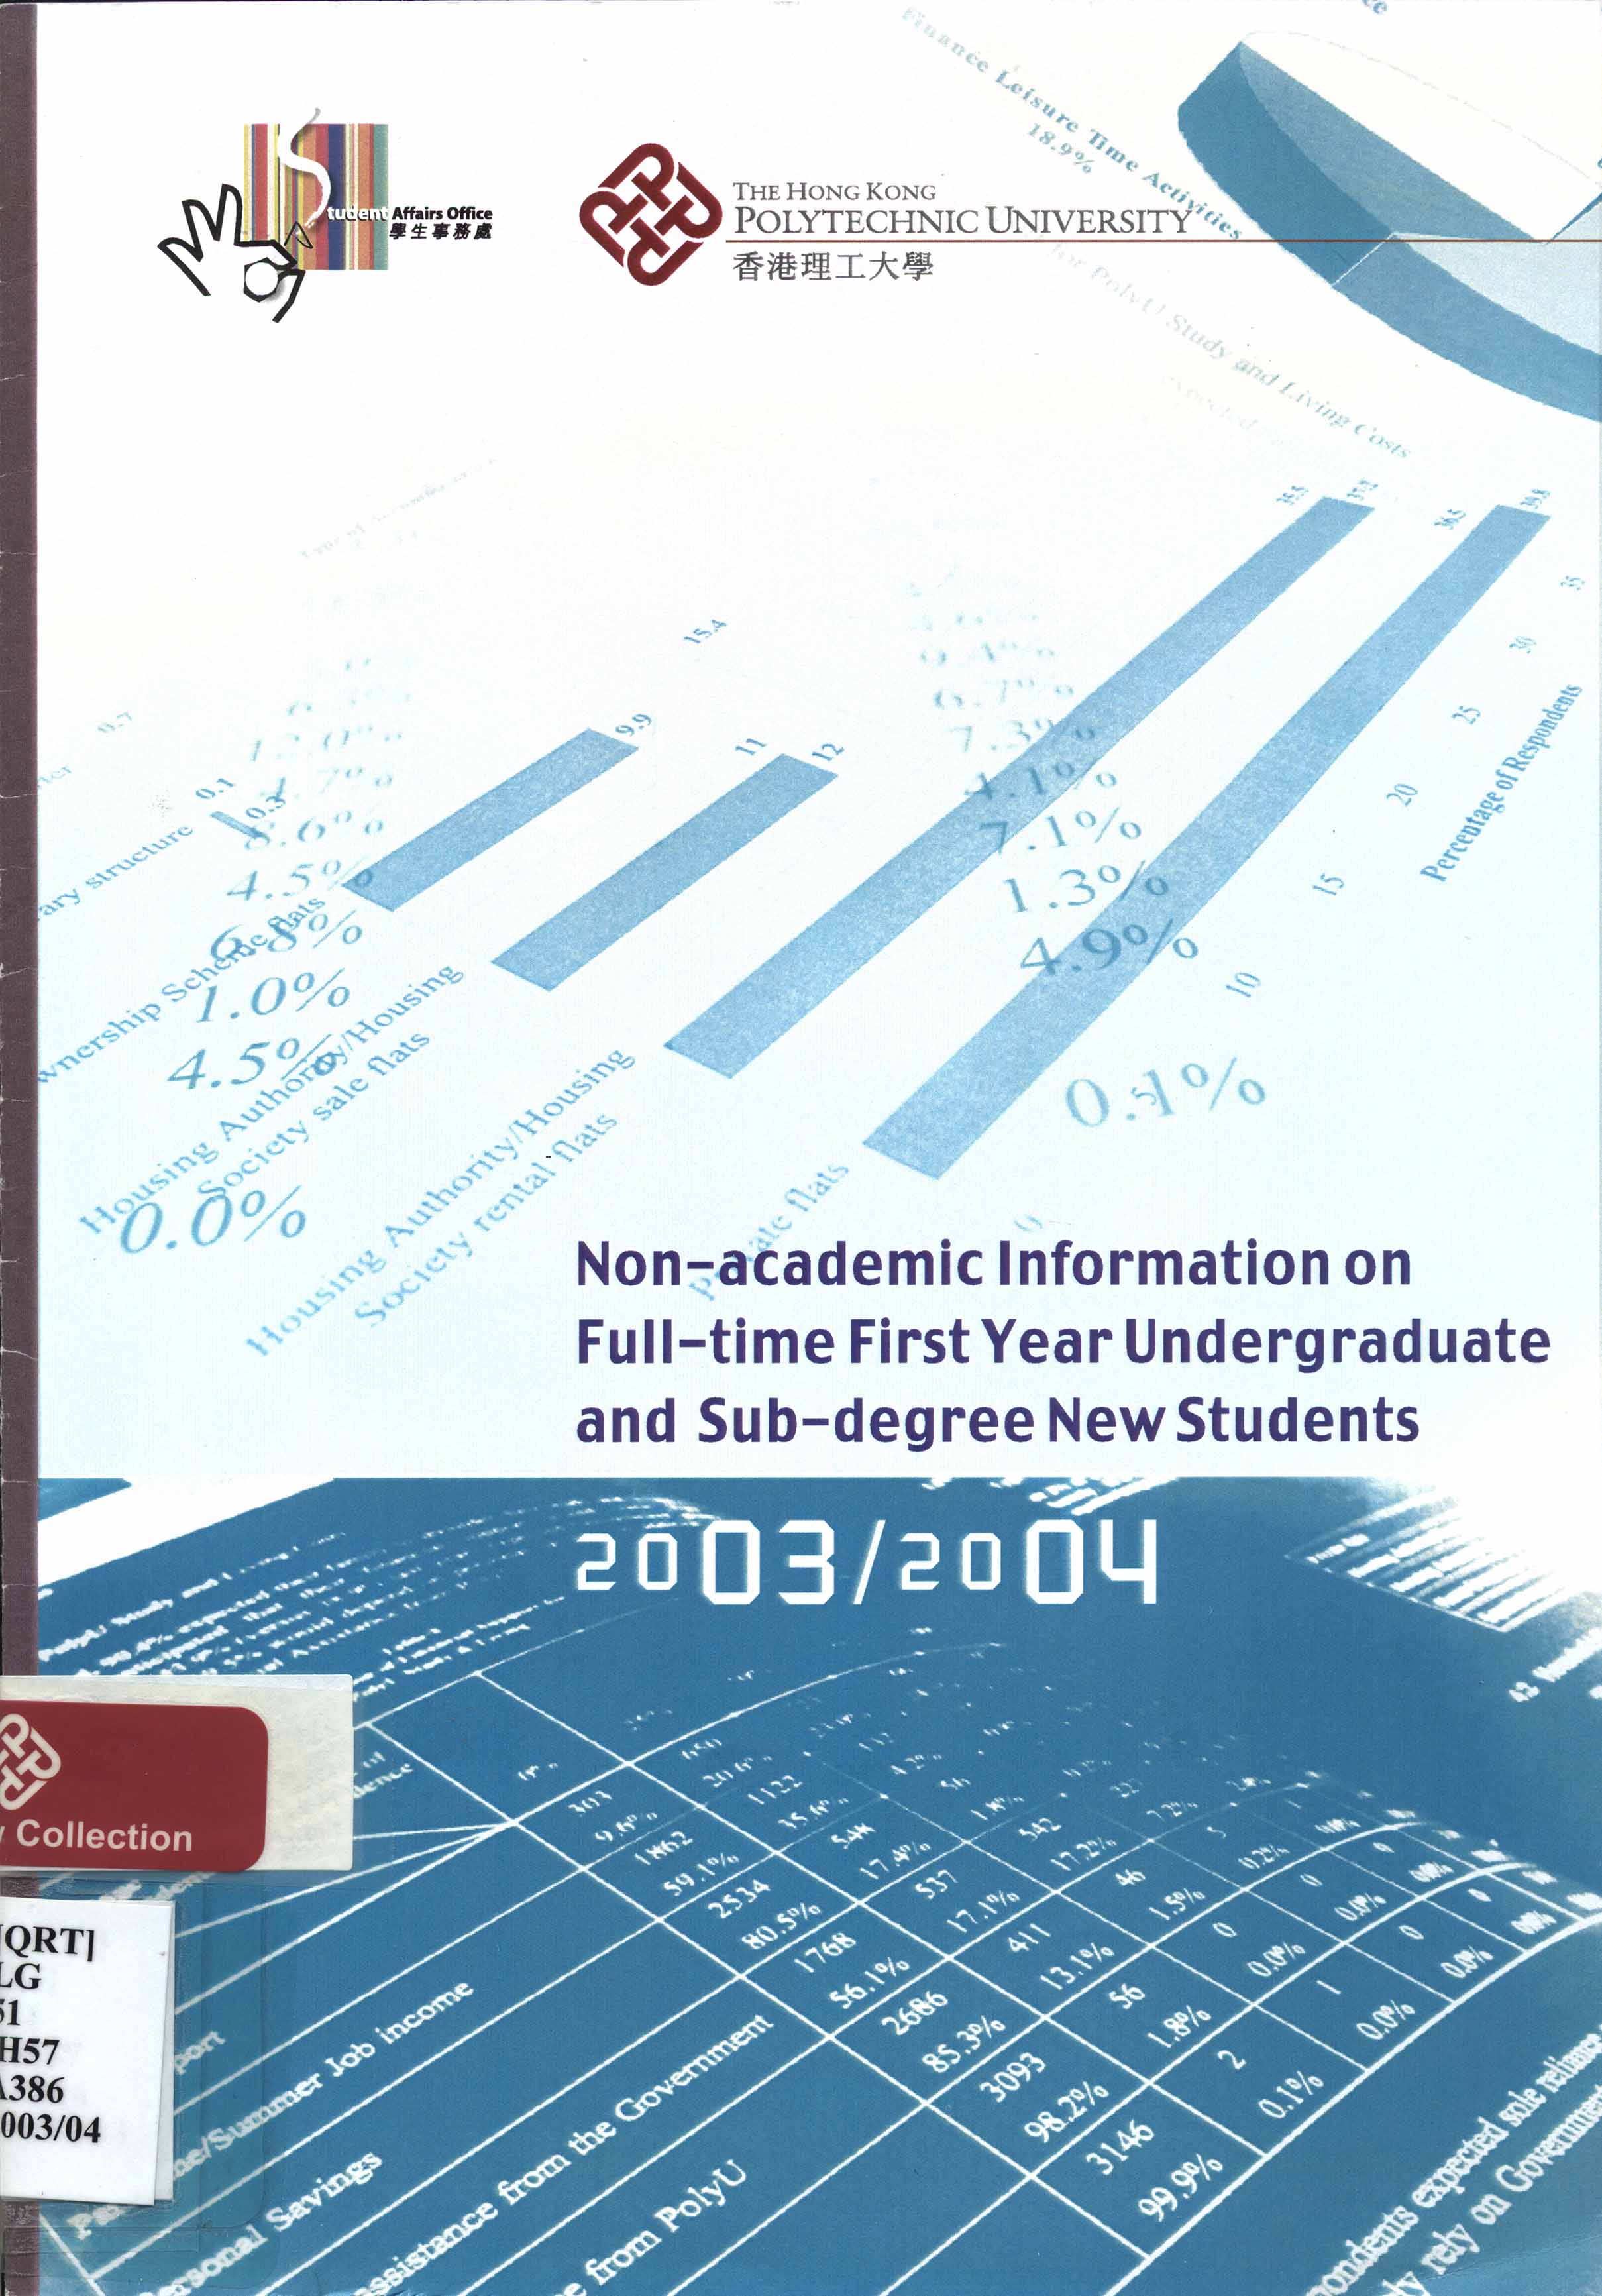 Non-academic information on full-time first year undergraduate and sub-degree new students [2003/2004]